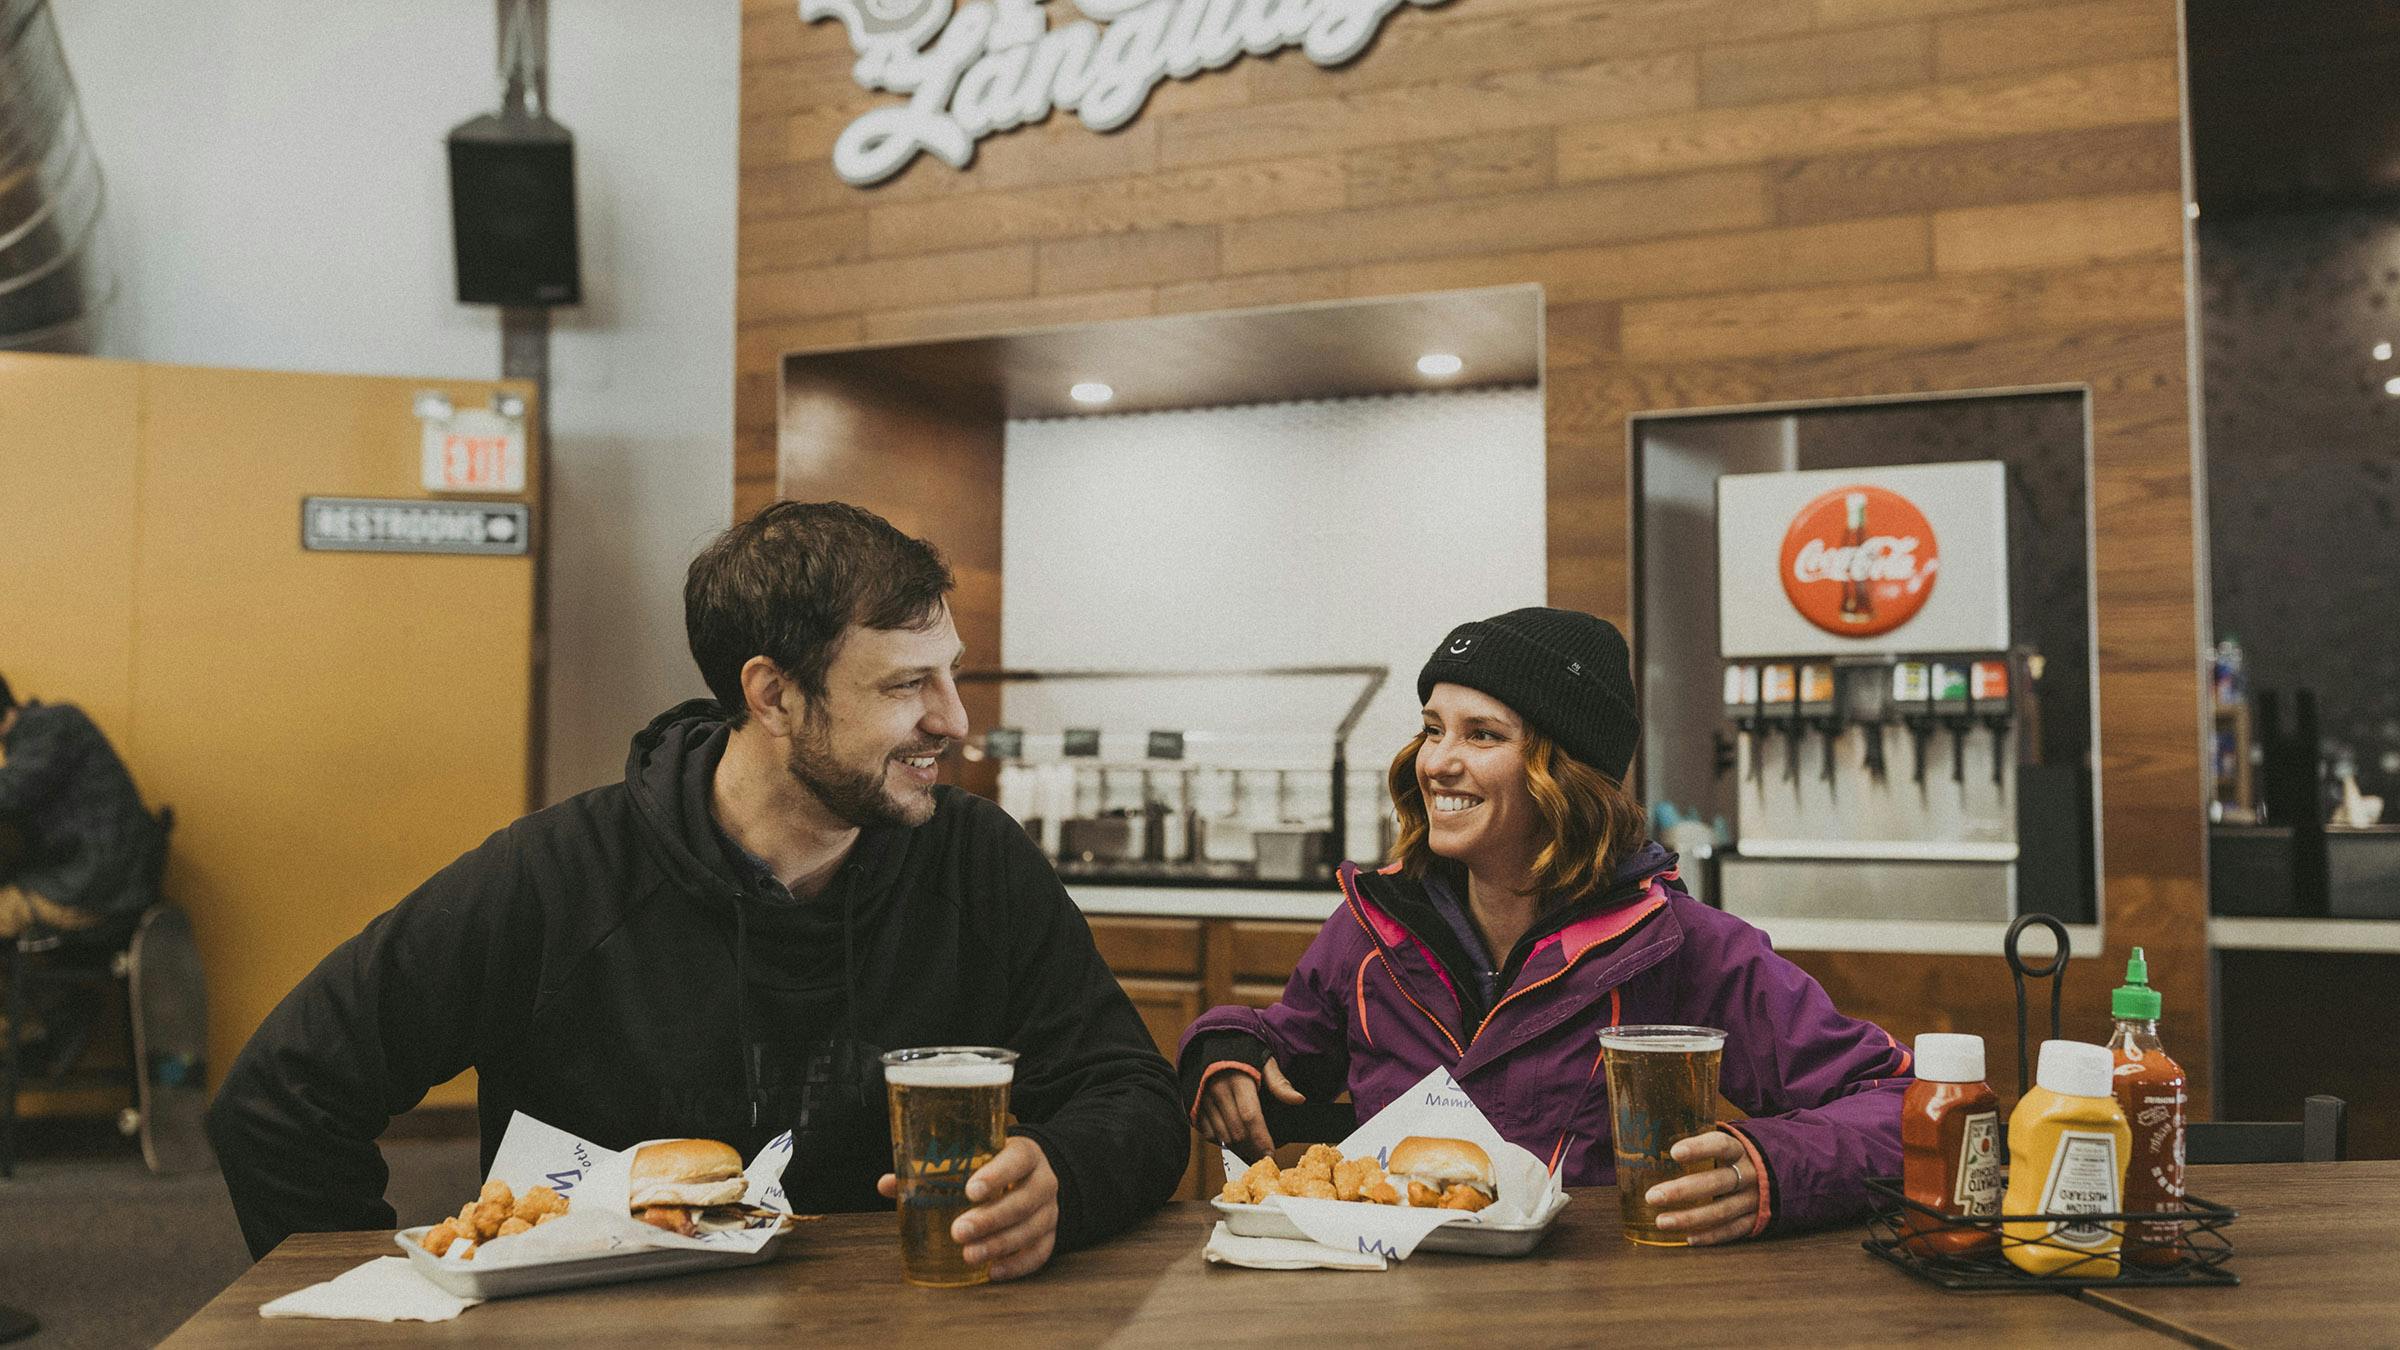 Smiling man and woman enjoying draft beers and chicken sandwiches